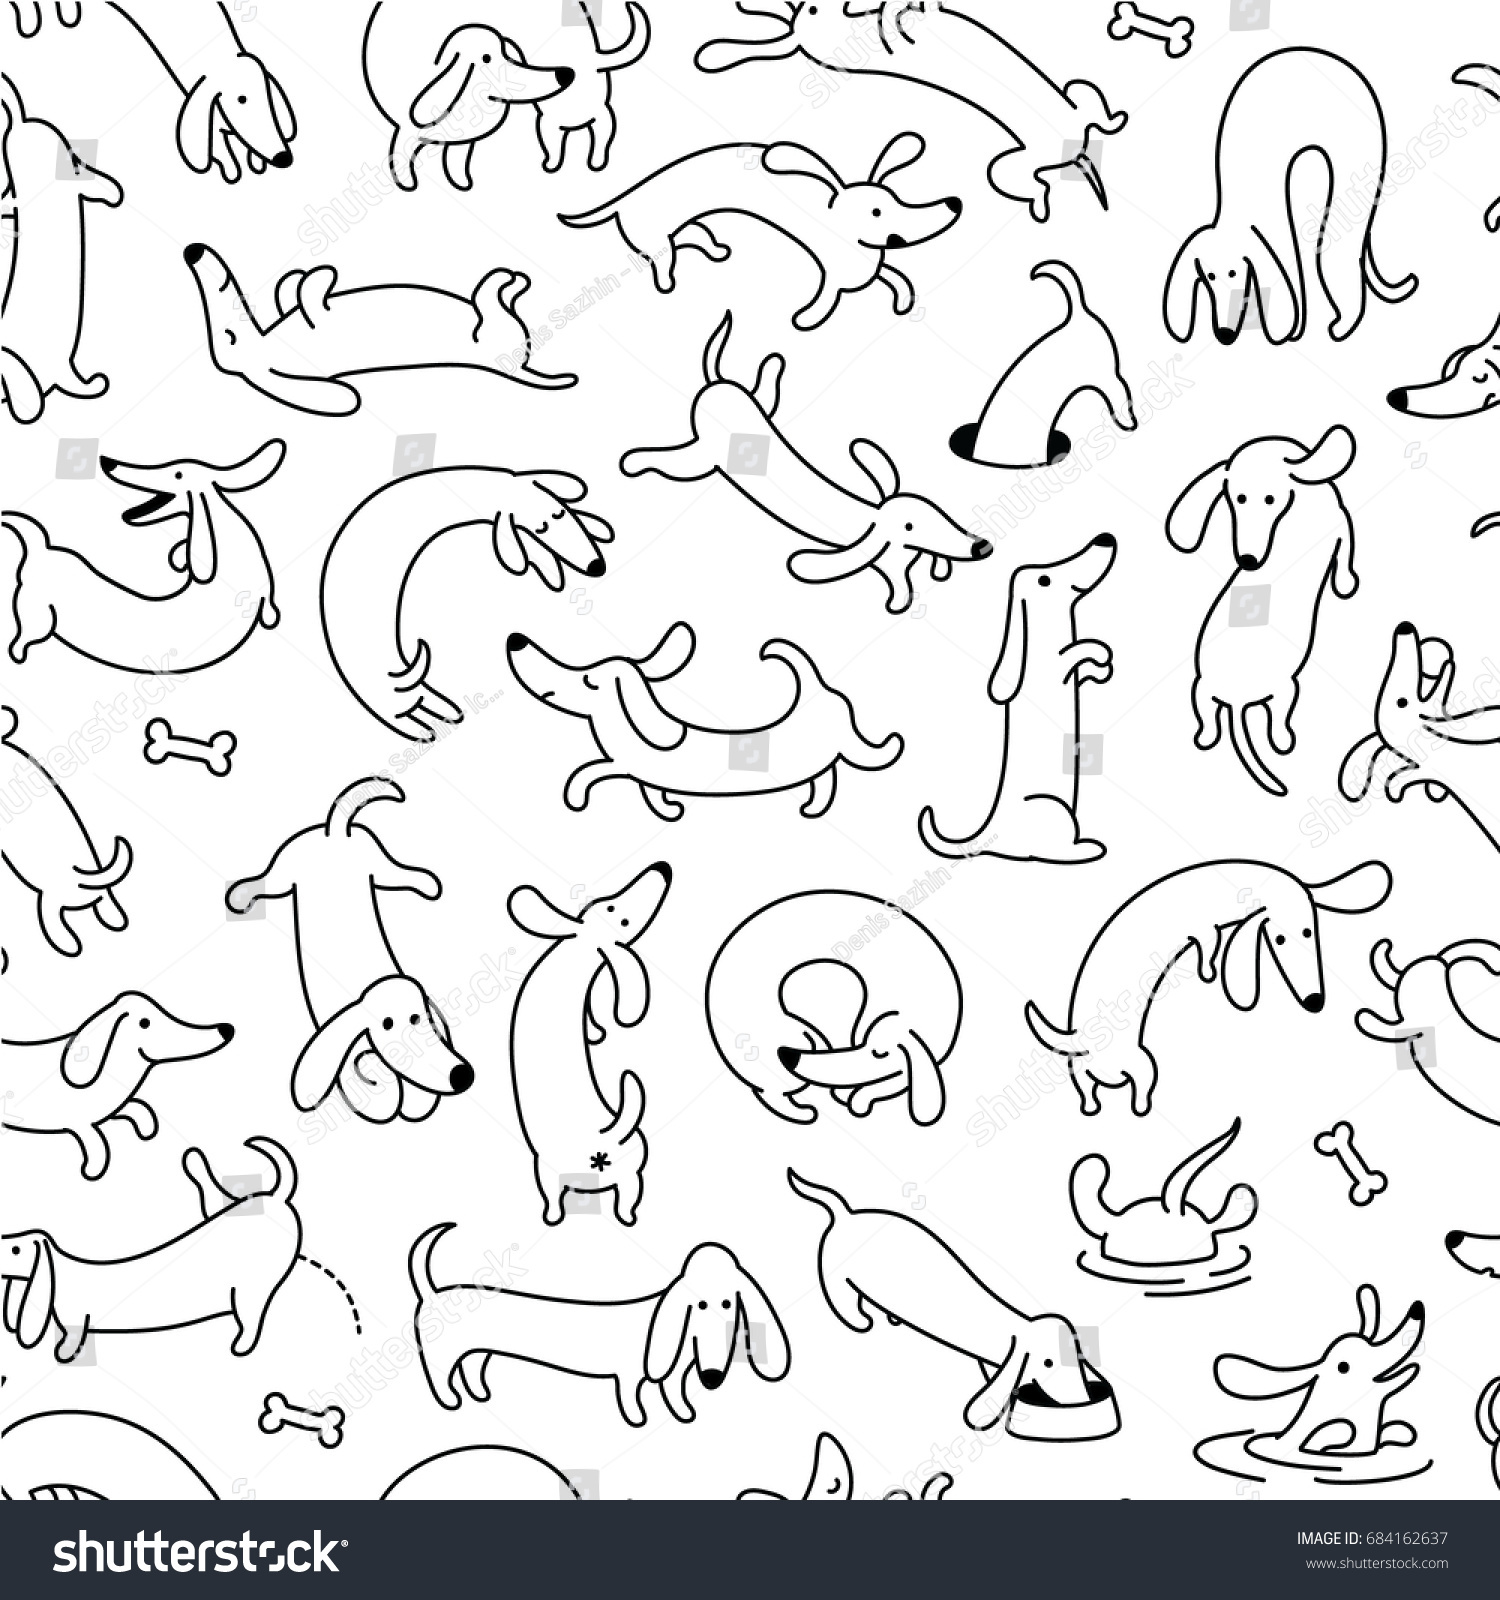 SVG of Dachshund Dog Pet Seamless Vector Pattern And Background svg